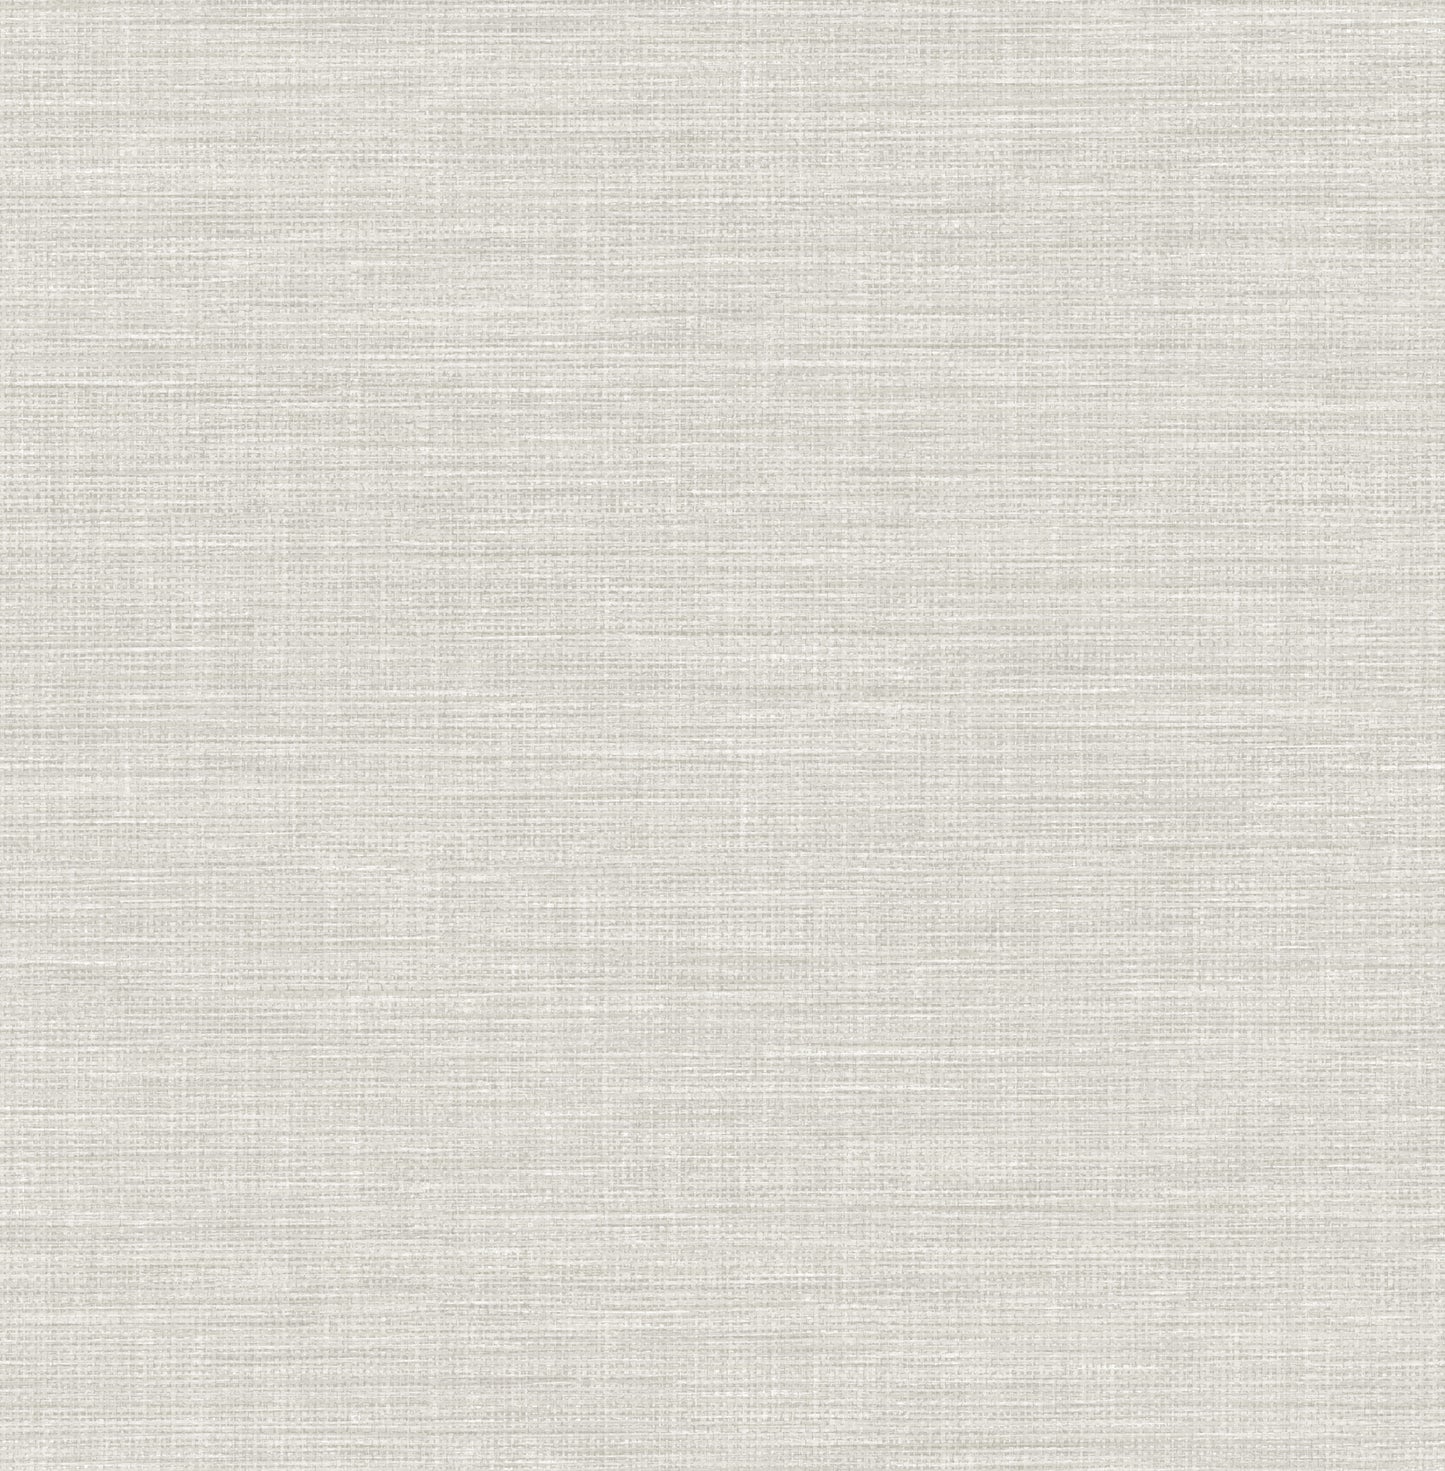 Looking for 2903-25851 Blue Bell Exhale Light Grey Faux Grasscloth A Street Prints Wallpaper